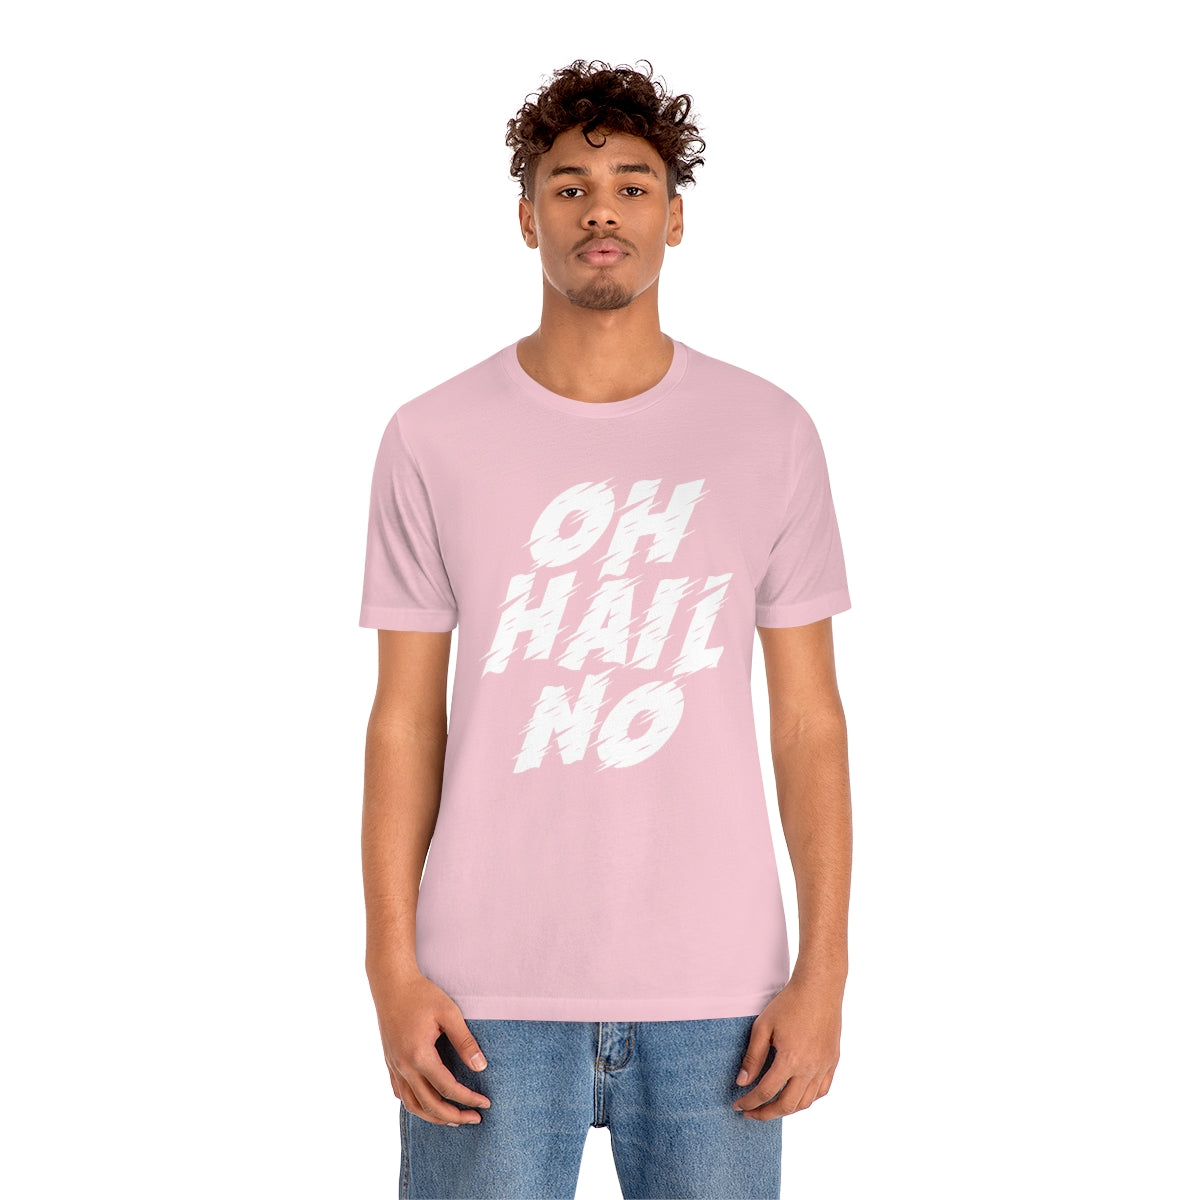 Oh Hail No Tee – Helicity Designs